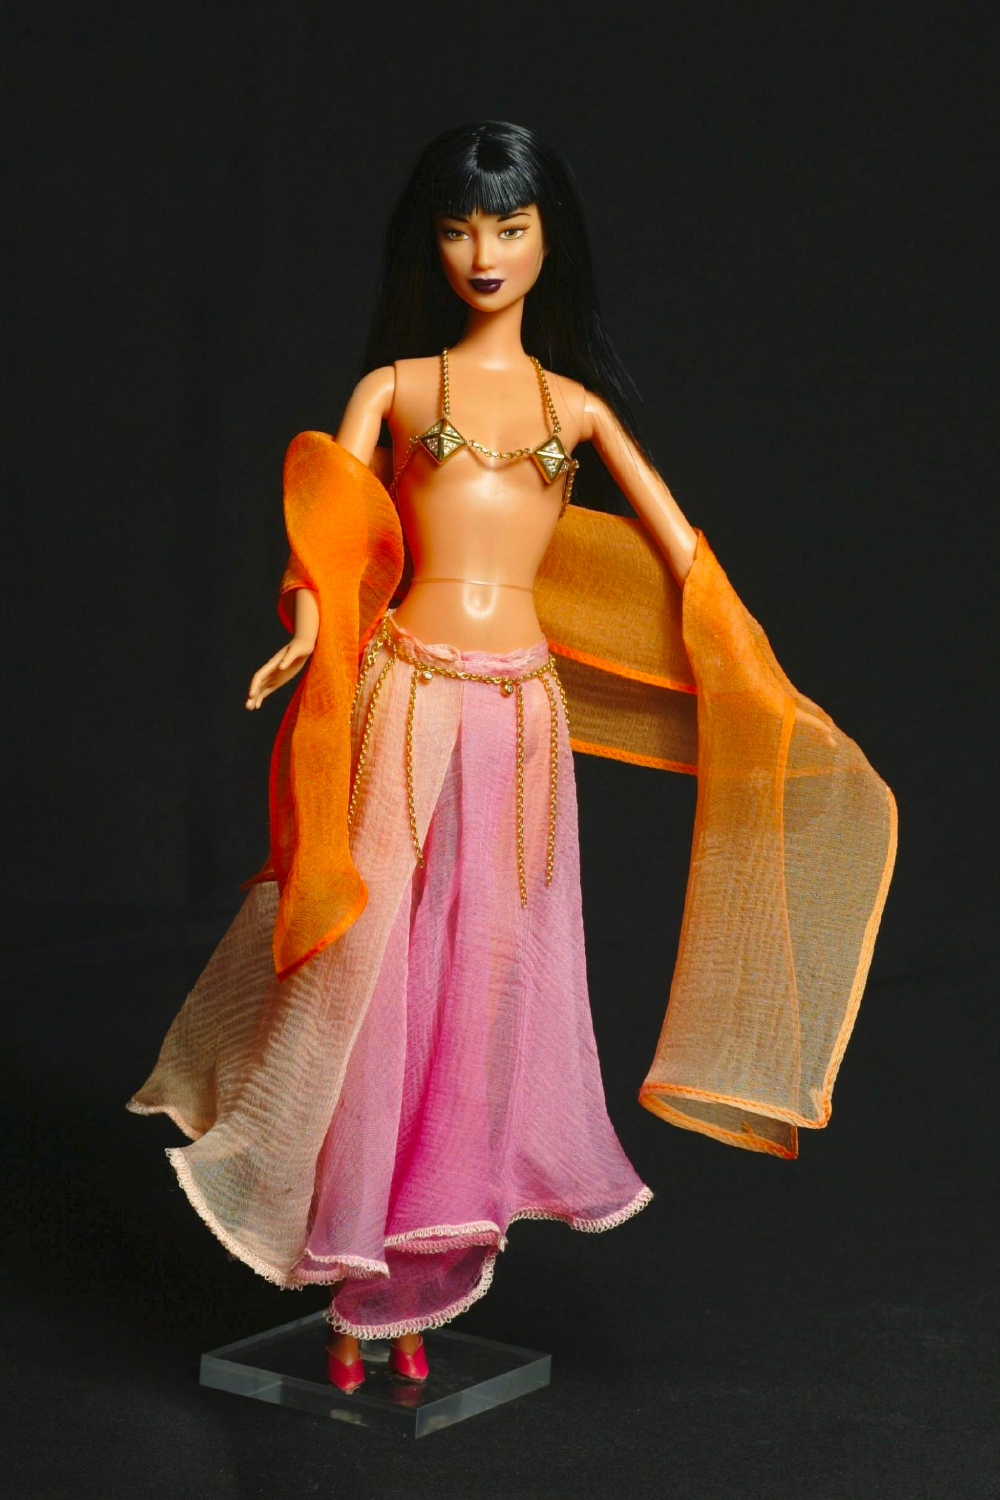 The 20 Most Expensive Barbie Dolls You Probably Still Own